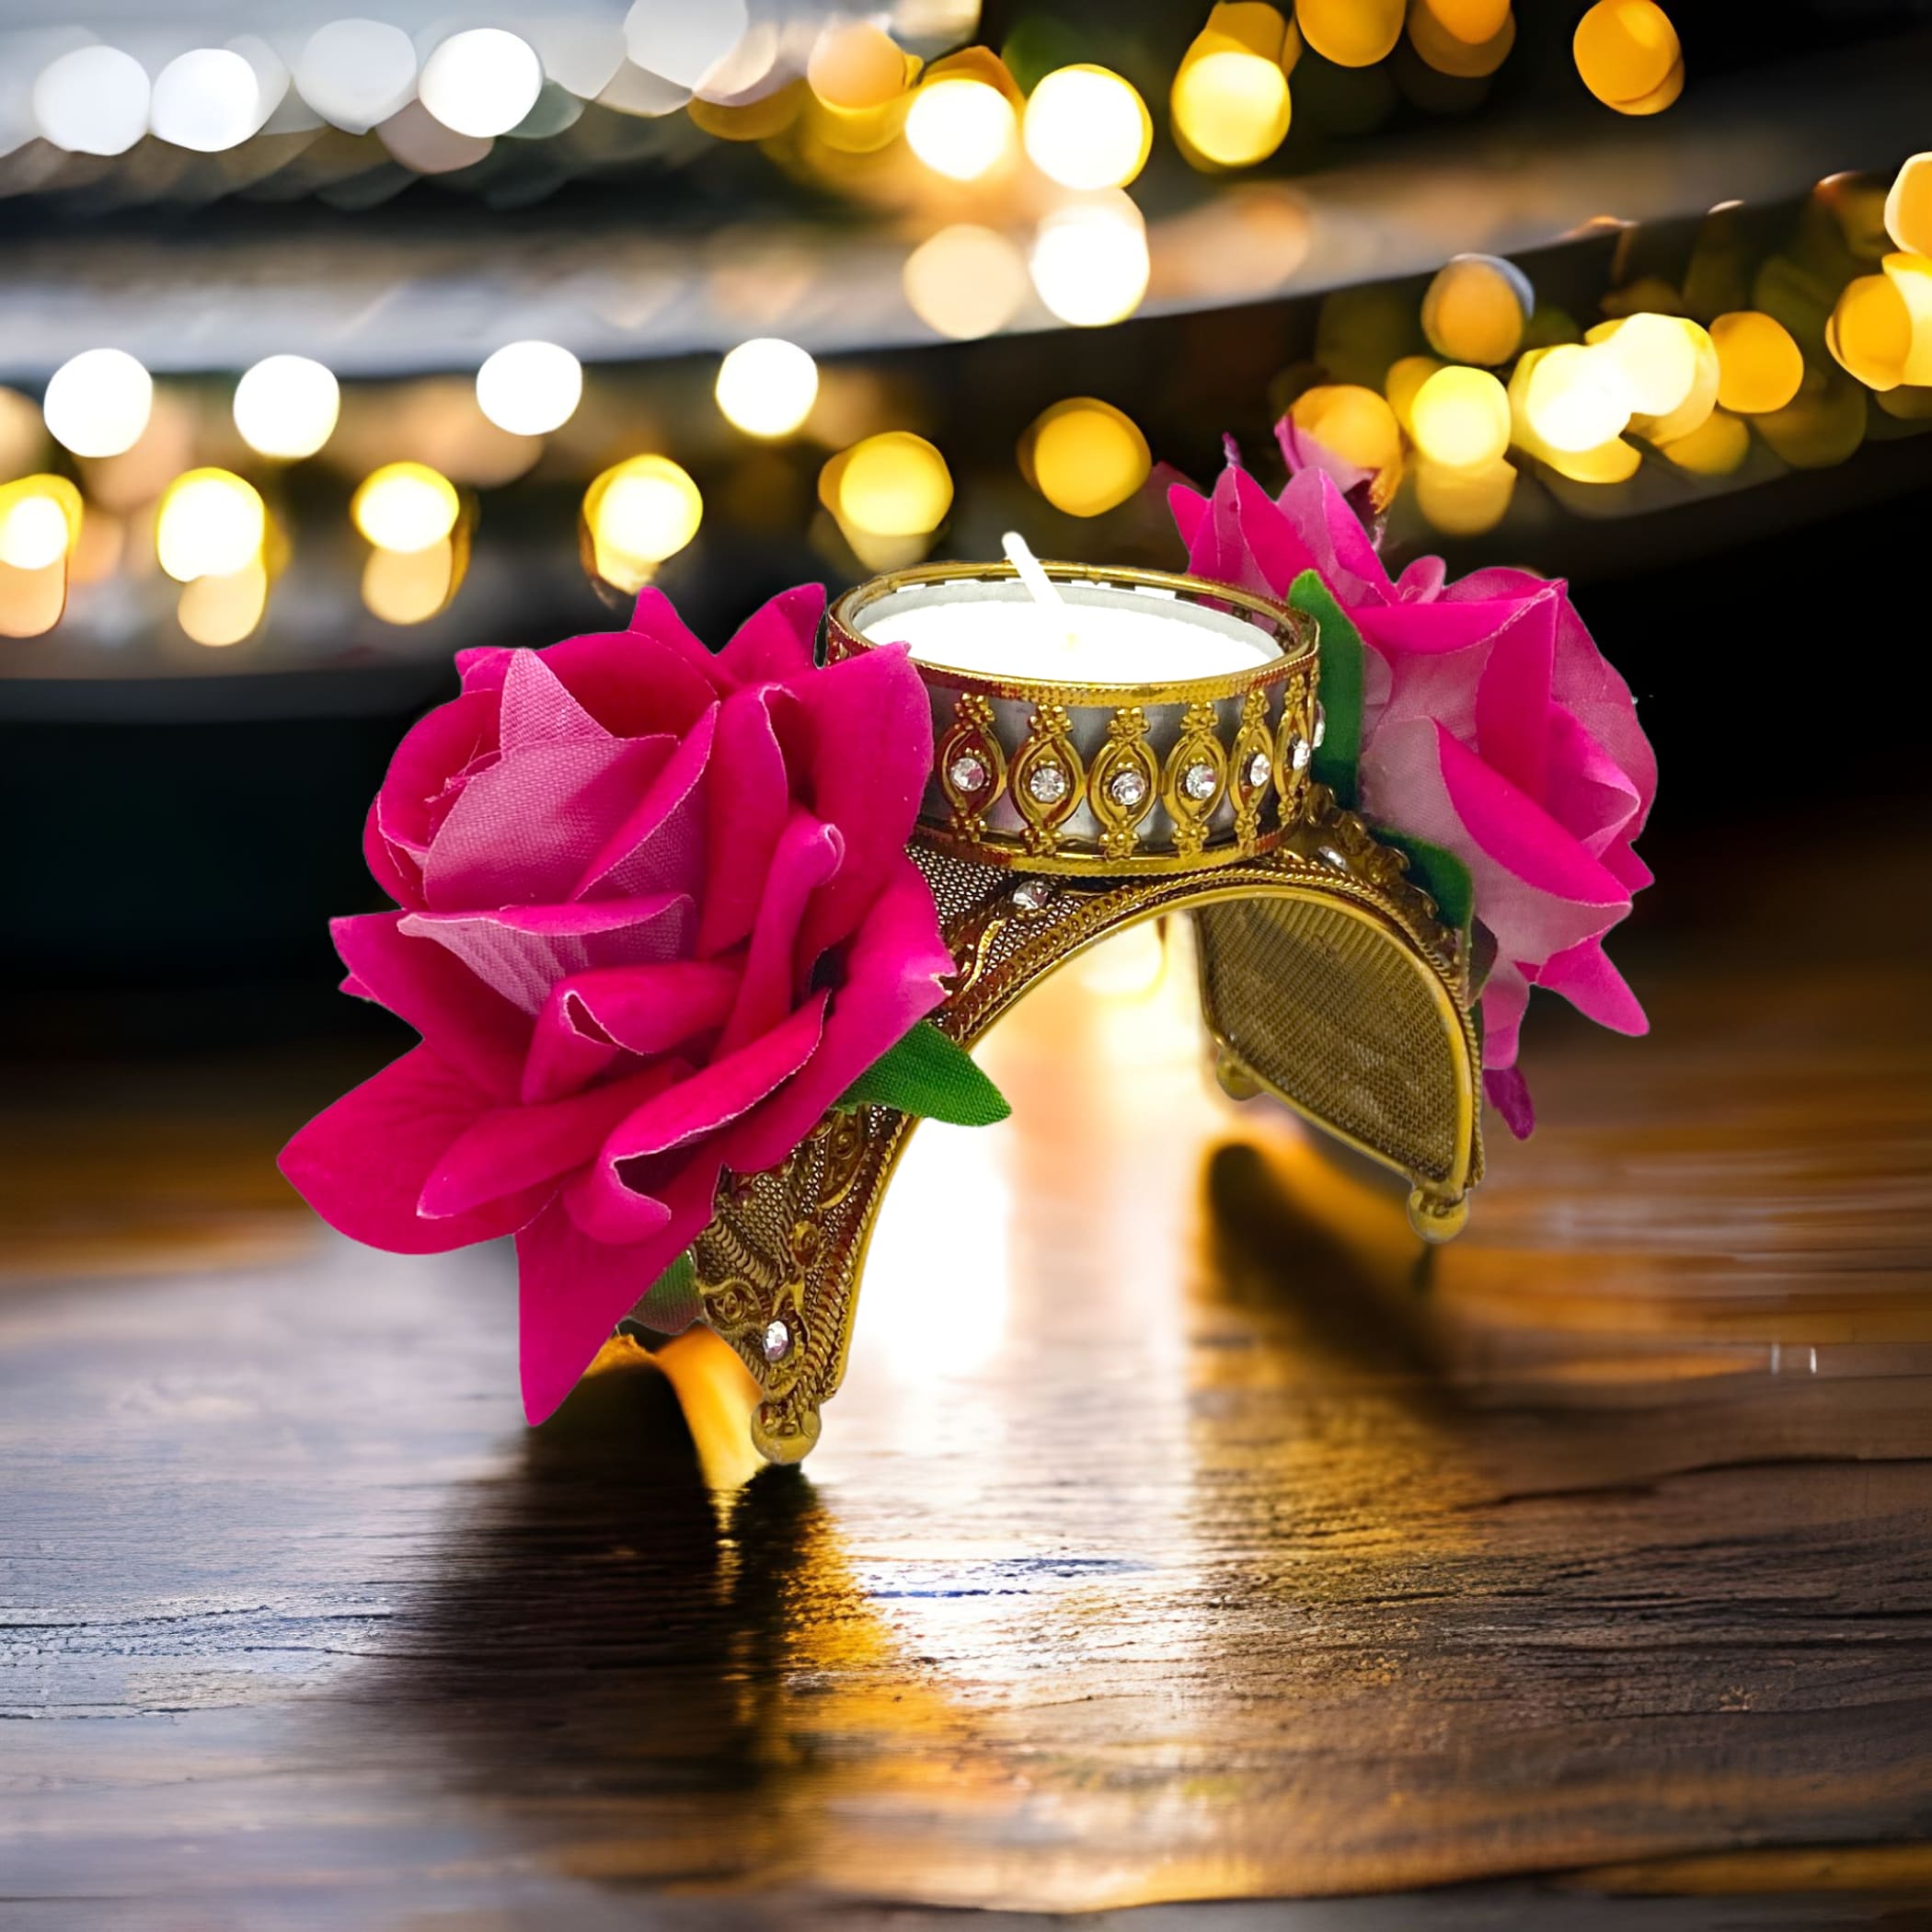 Rose Tealight Candle Holders Christmas Decorations Decor